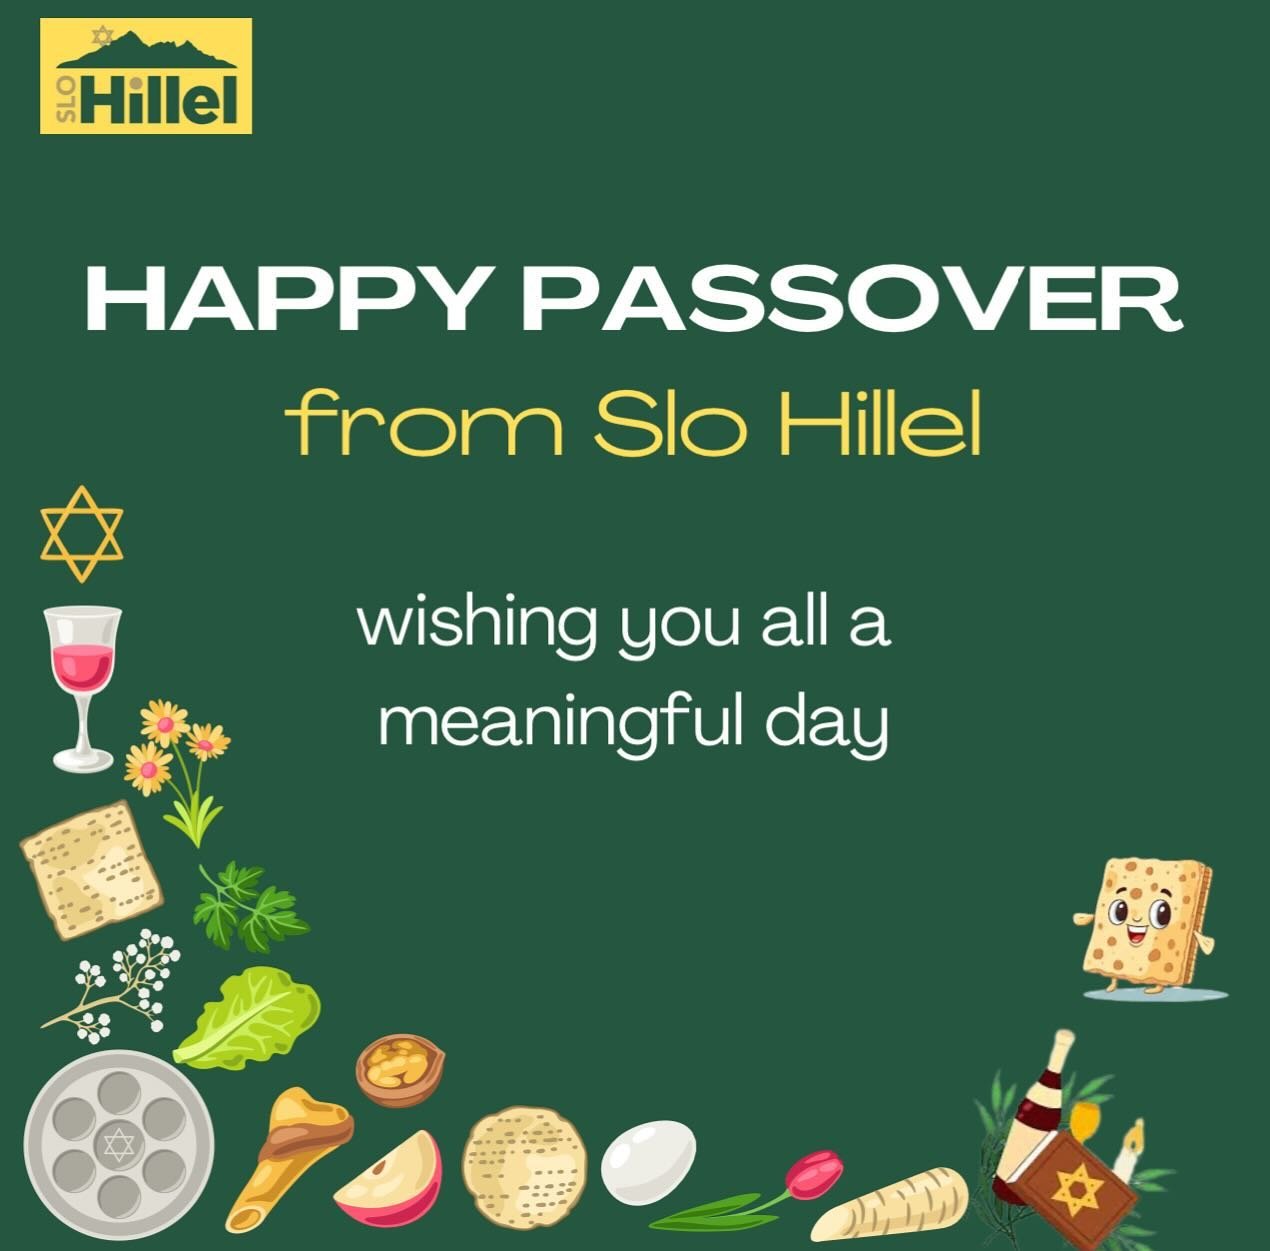 We wish all a meaningful Passover as we hold in our hearts those still held hostage and anyone enduring antisemitism. Our story and people are about endurance and we bring in this Pesach celebrating our history and freedom.✡️